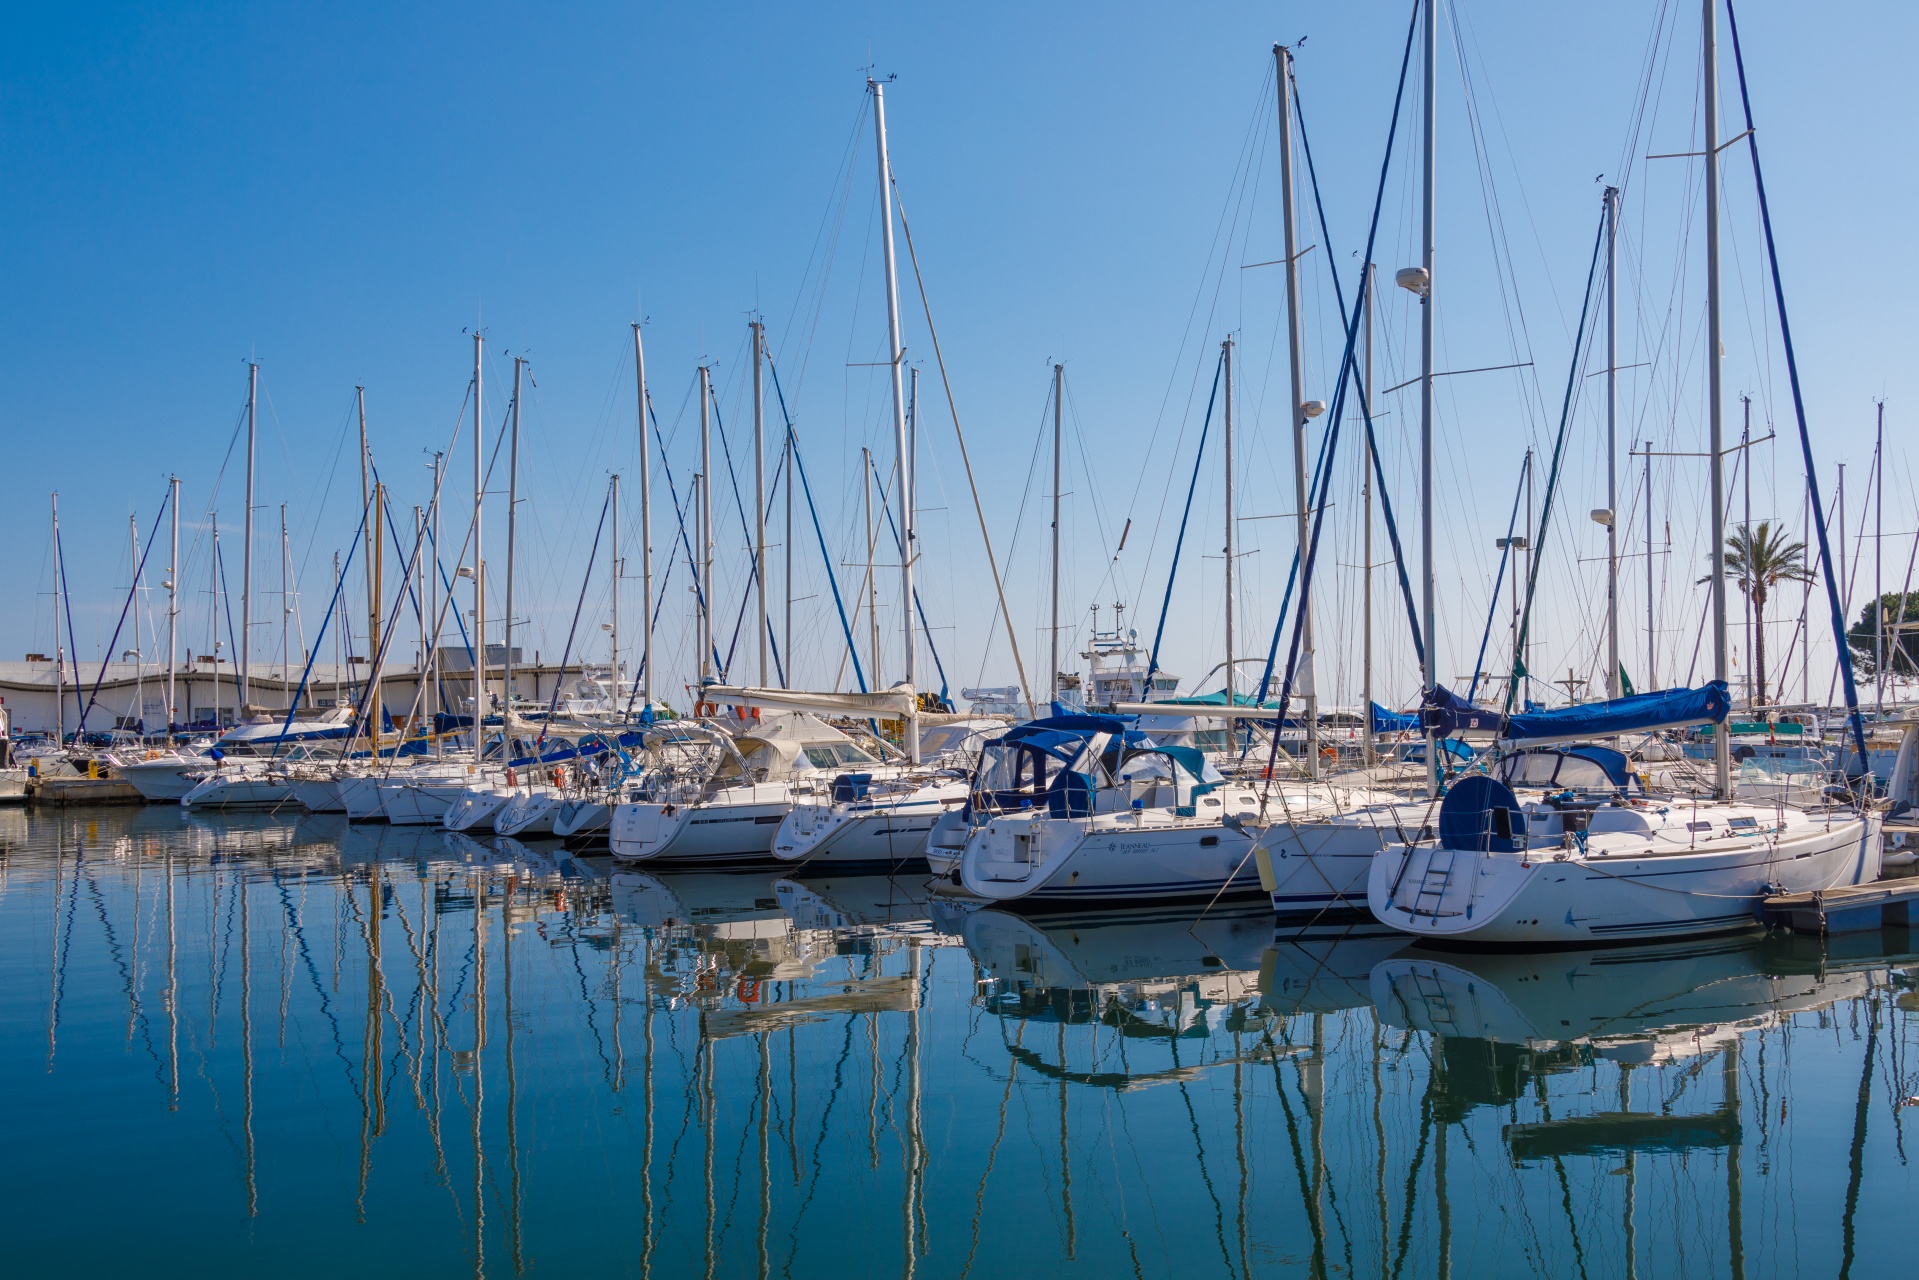 Luxury yachts moored in a marina